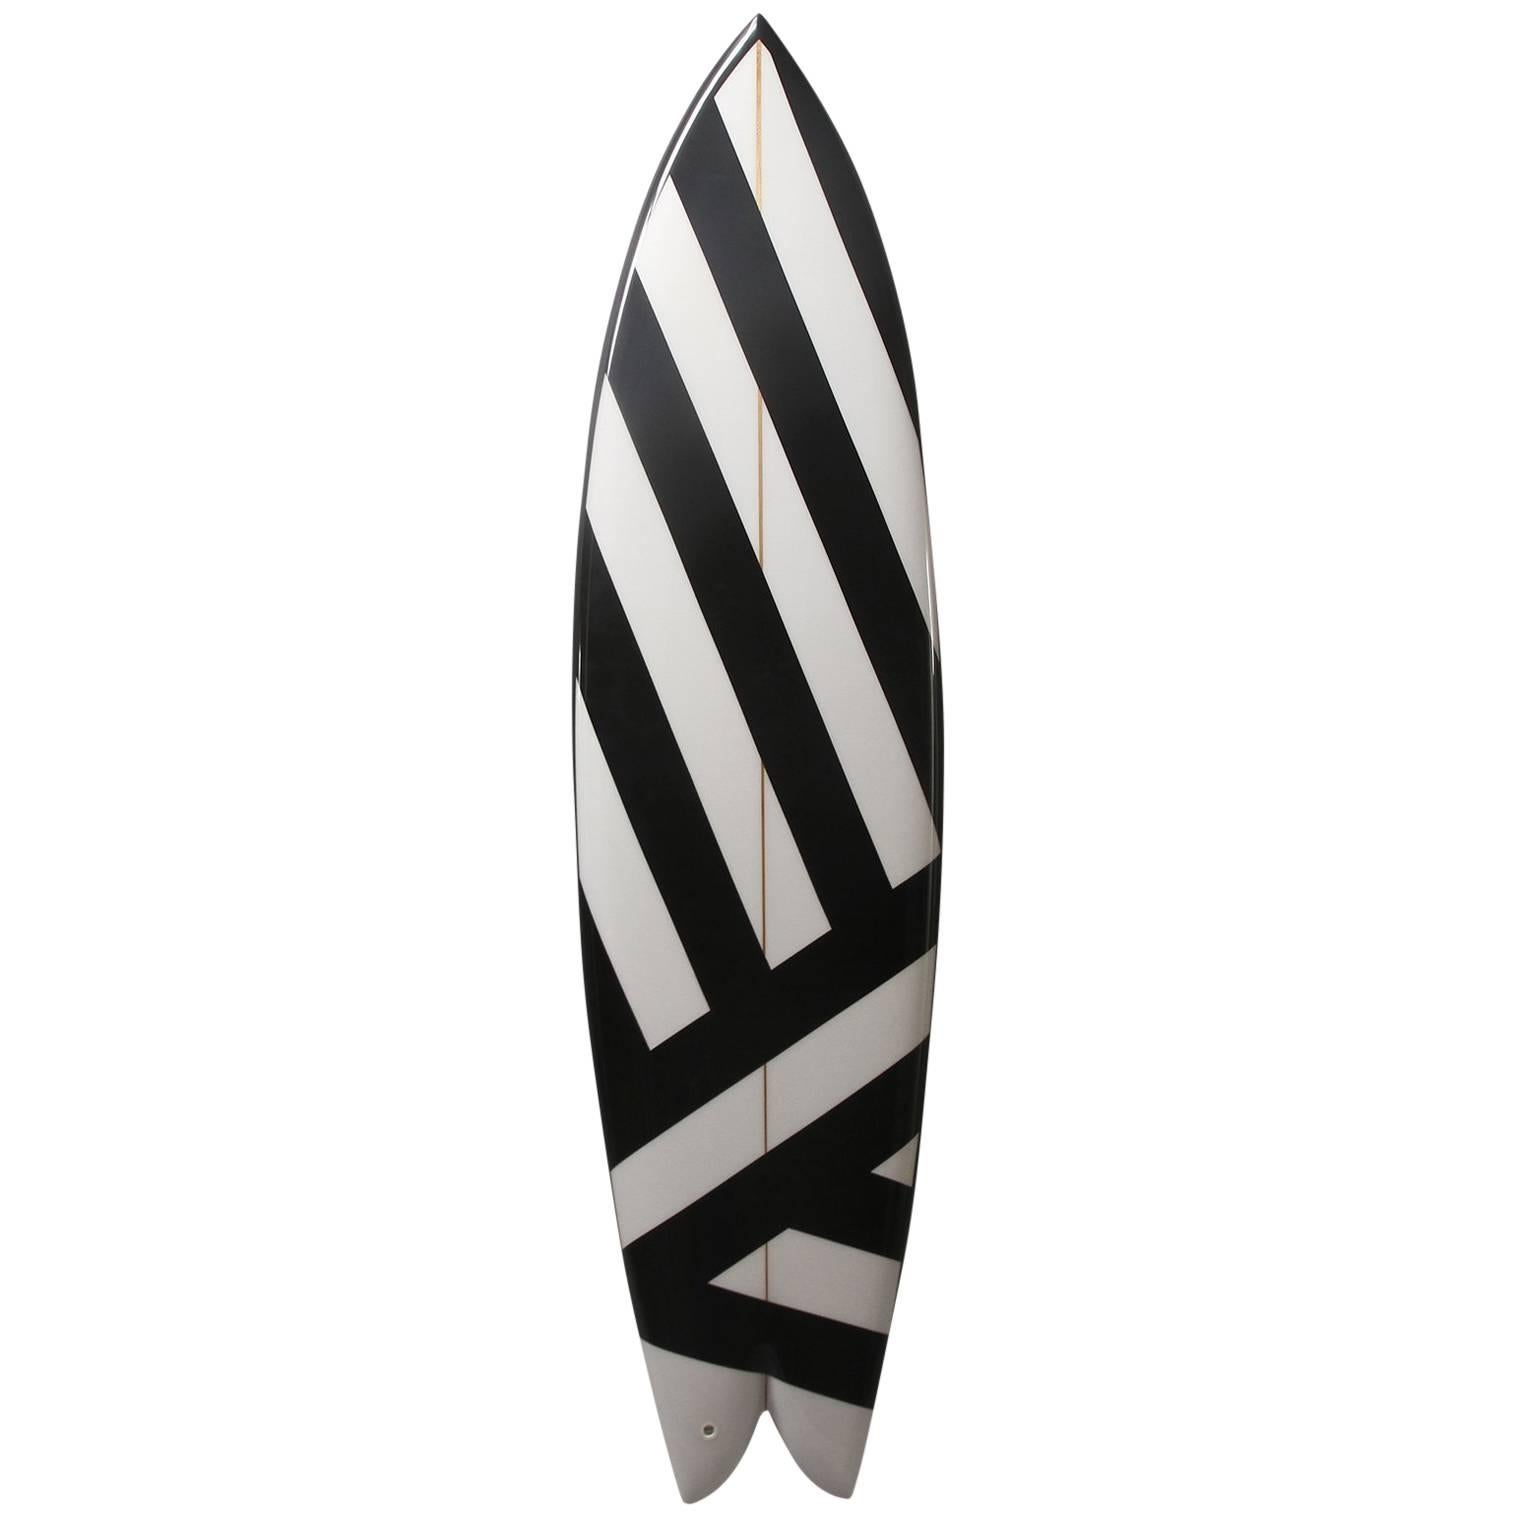 Dazzle Surfboard by Christopher Kreiling